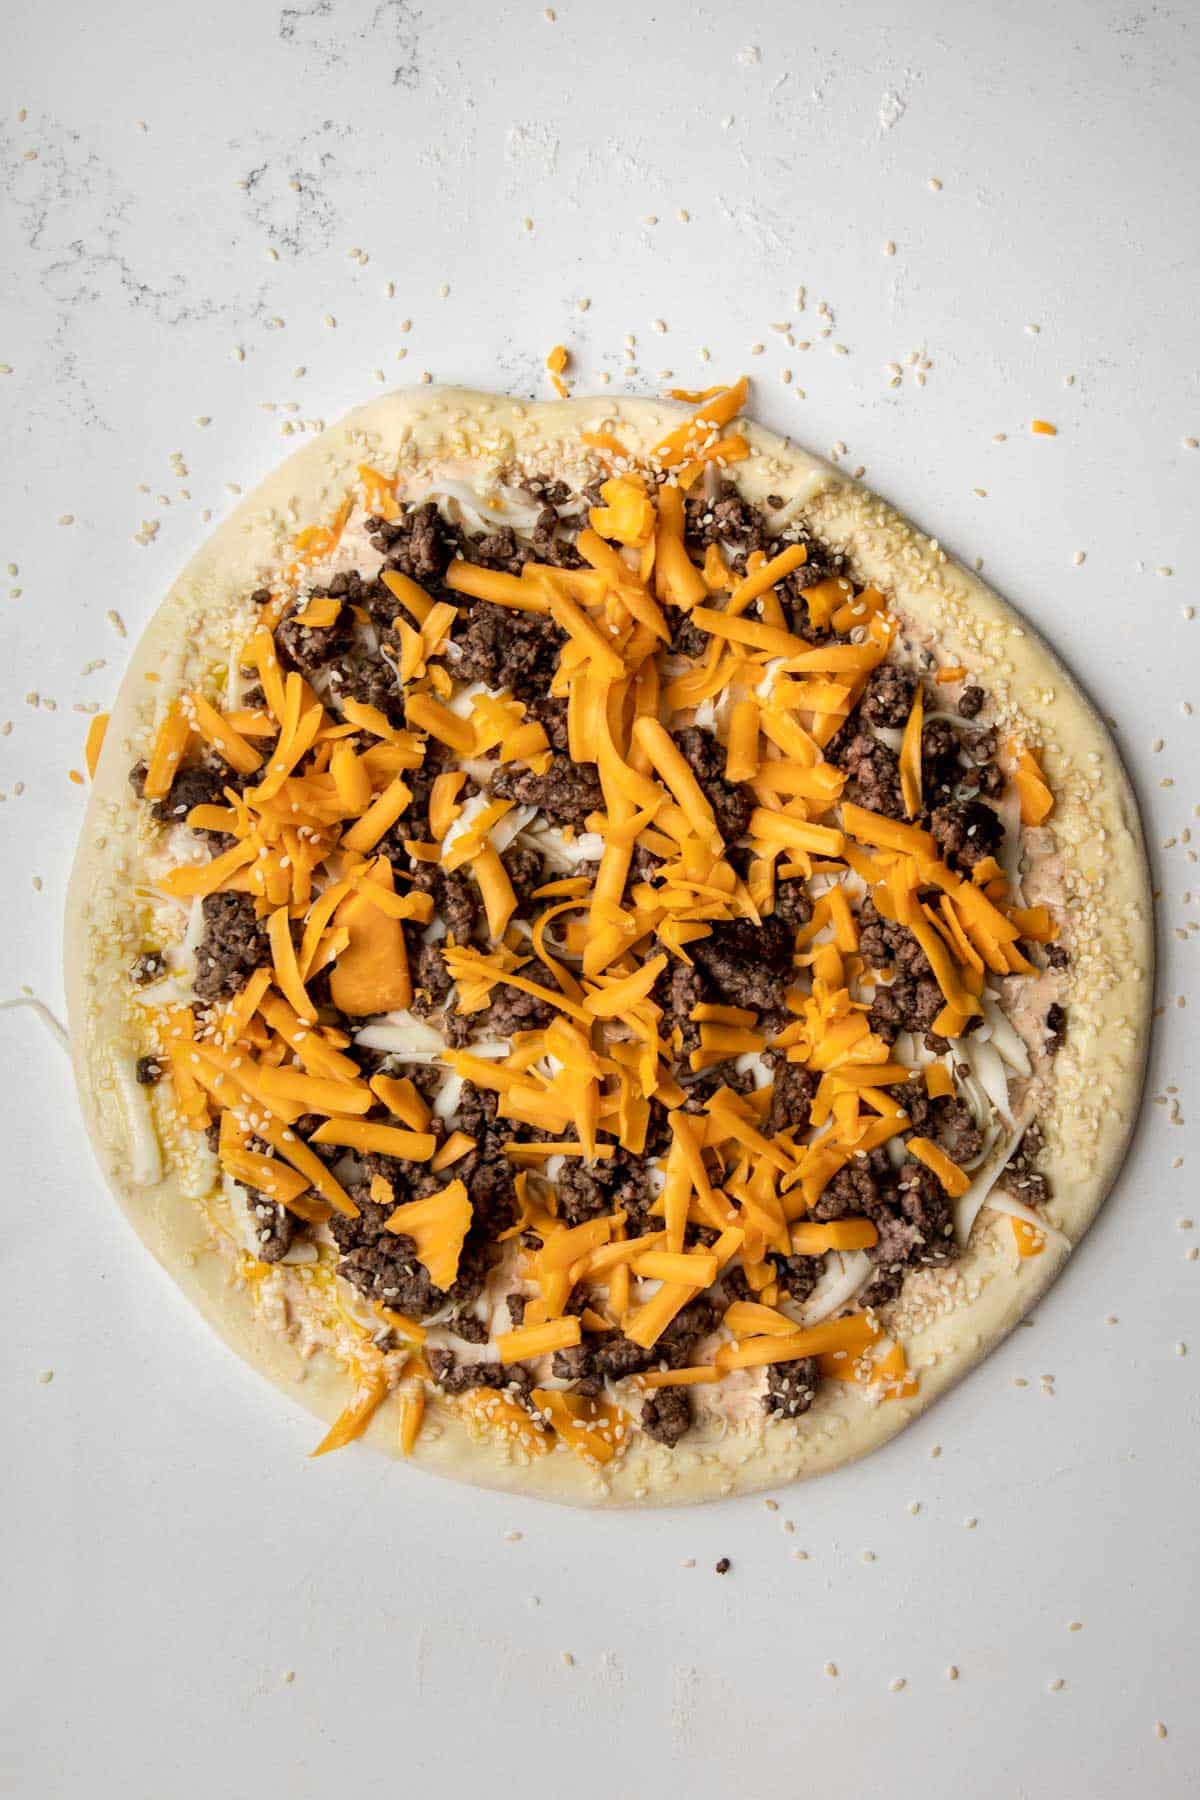 pizza dough topped with big mac sauce, mozzarella cheese, cooked ground beef, cheddar cheese and sesame seeds.